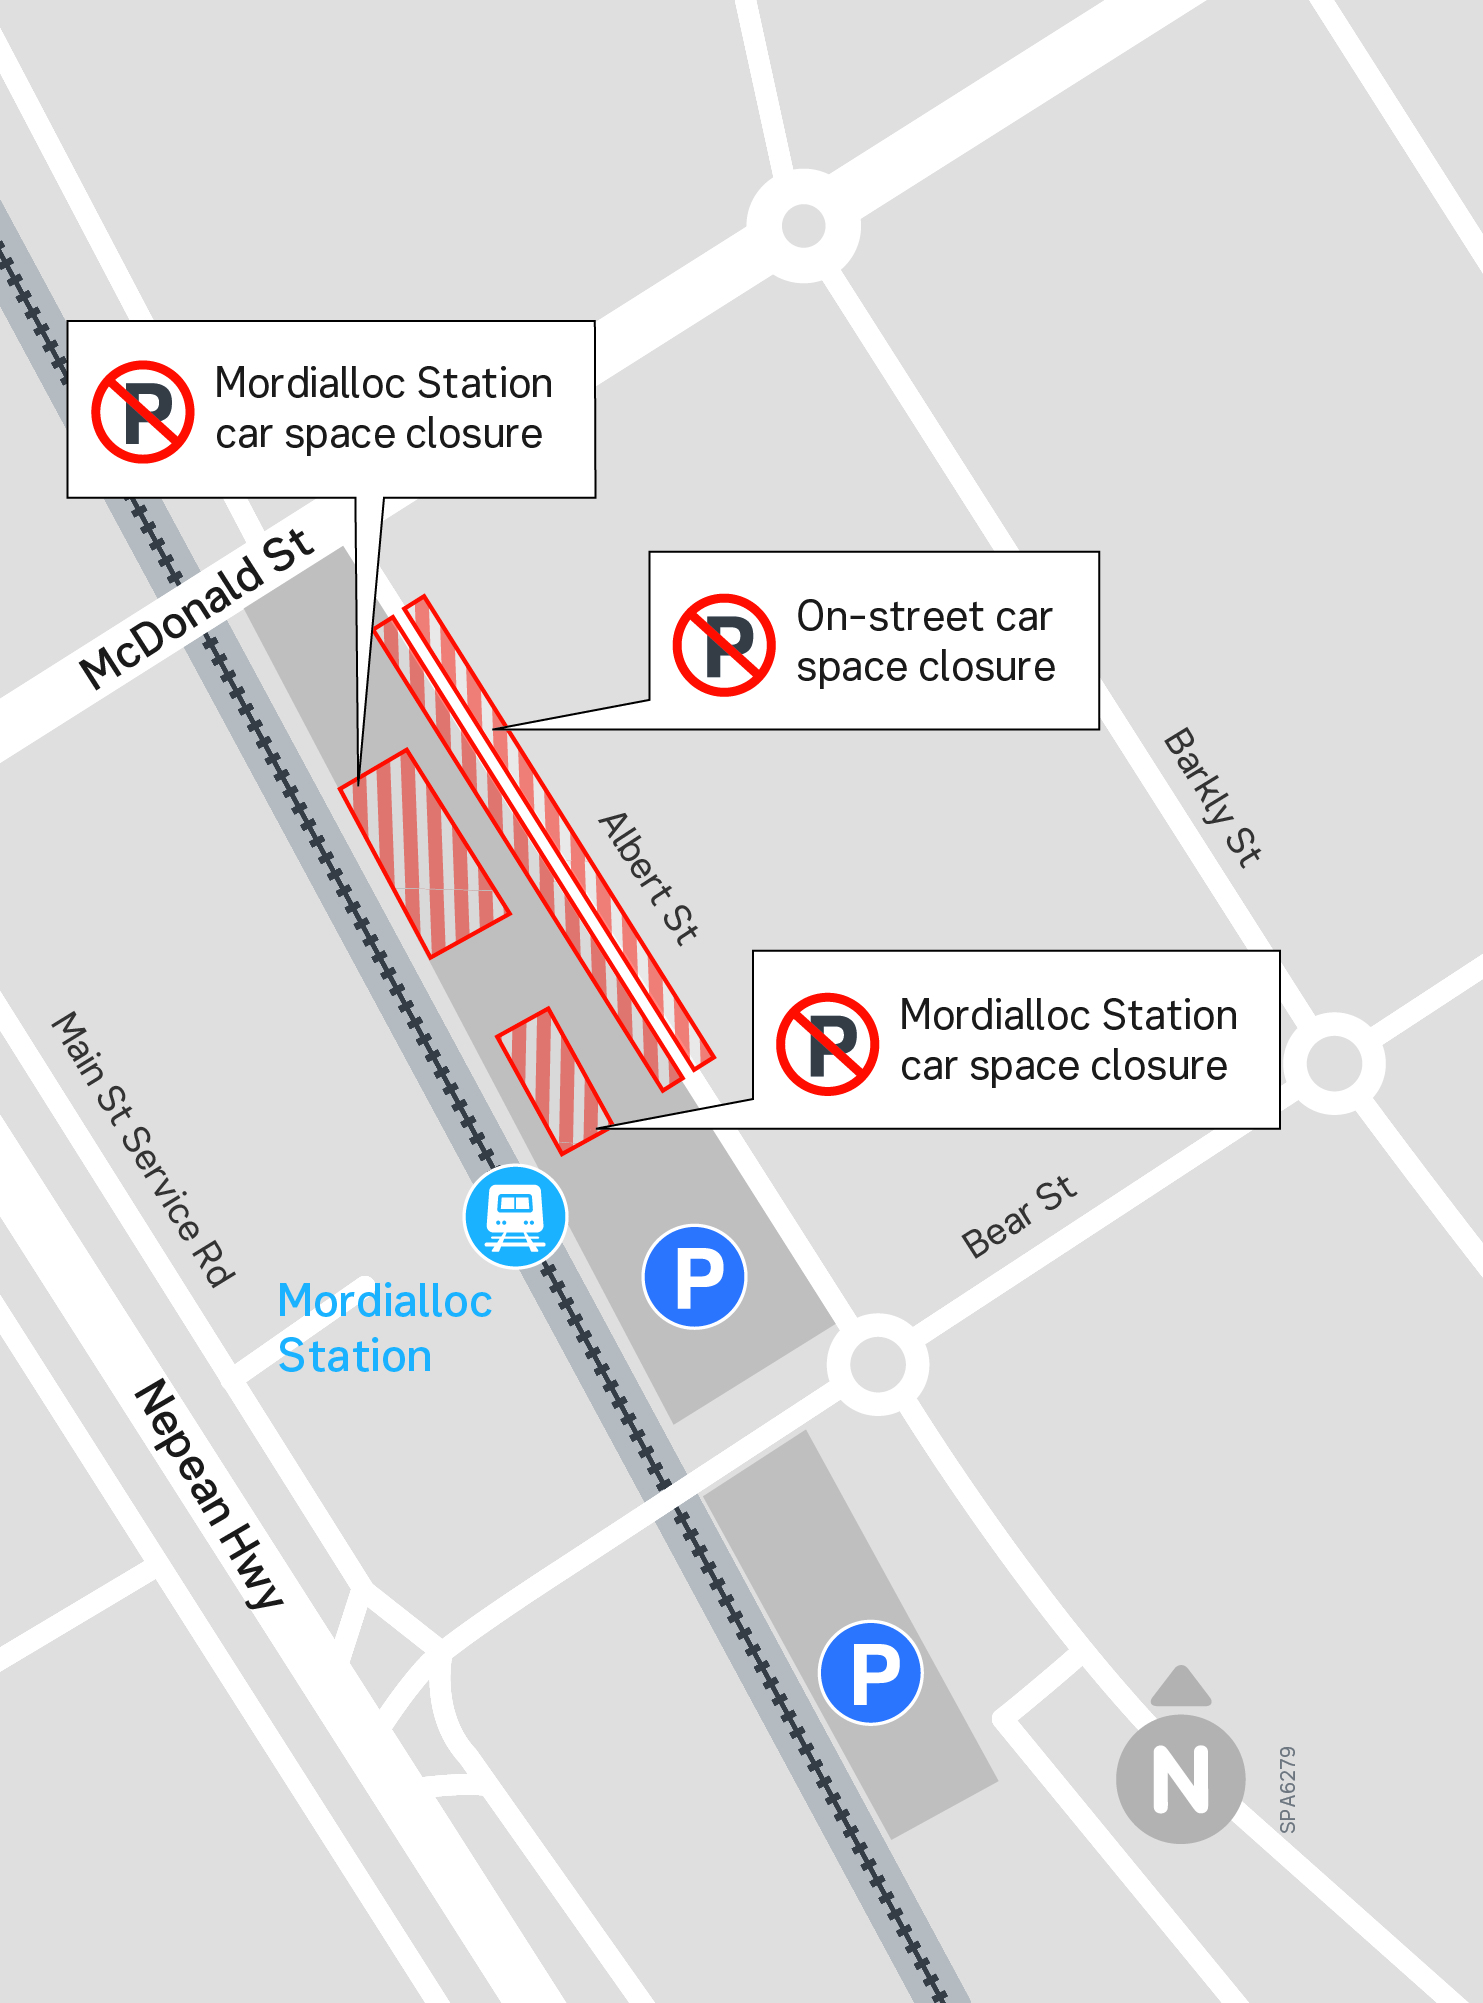 Mordialloc car space closure - click to view larger version of map